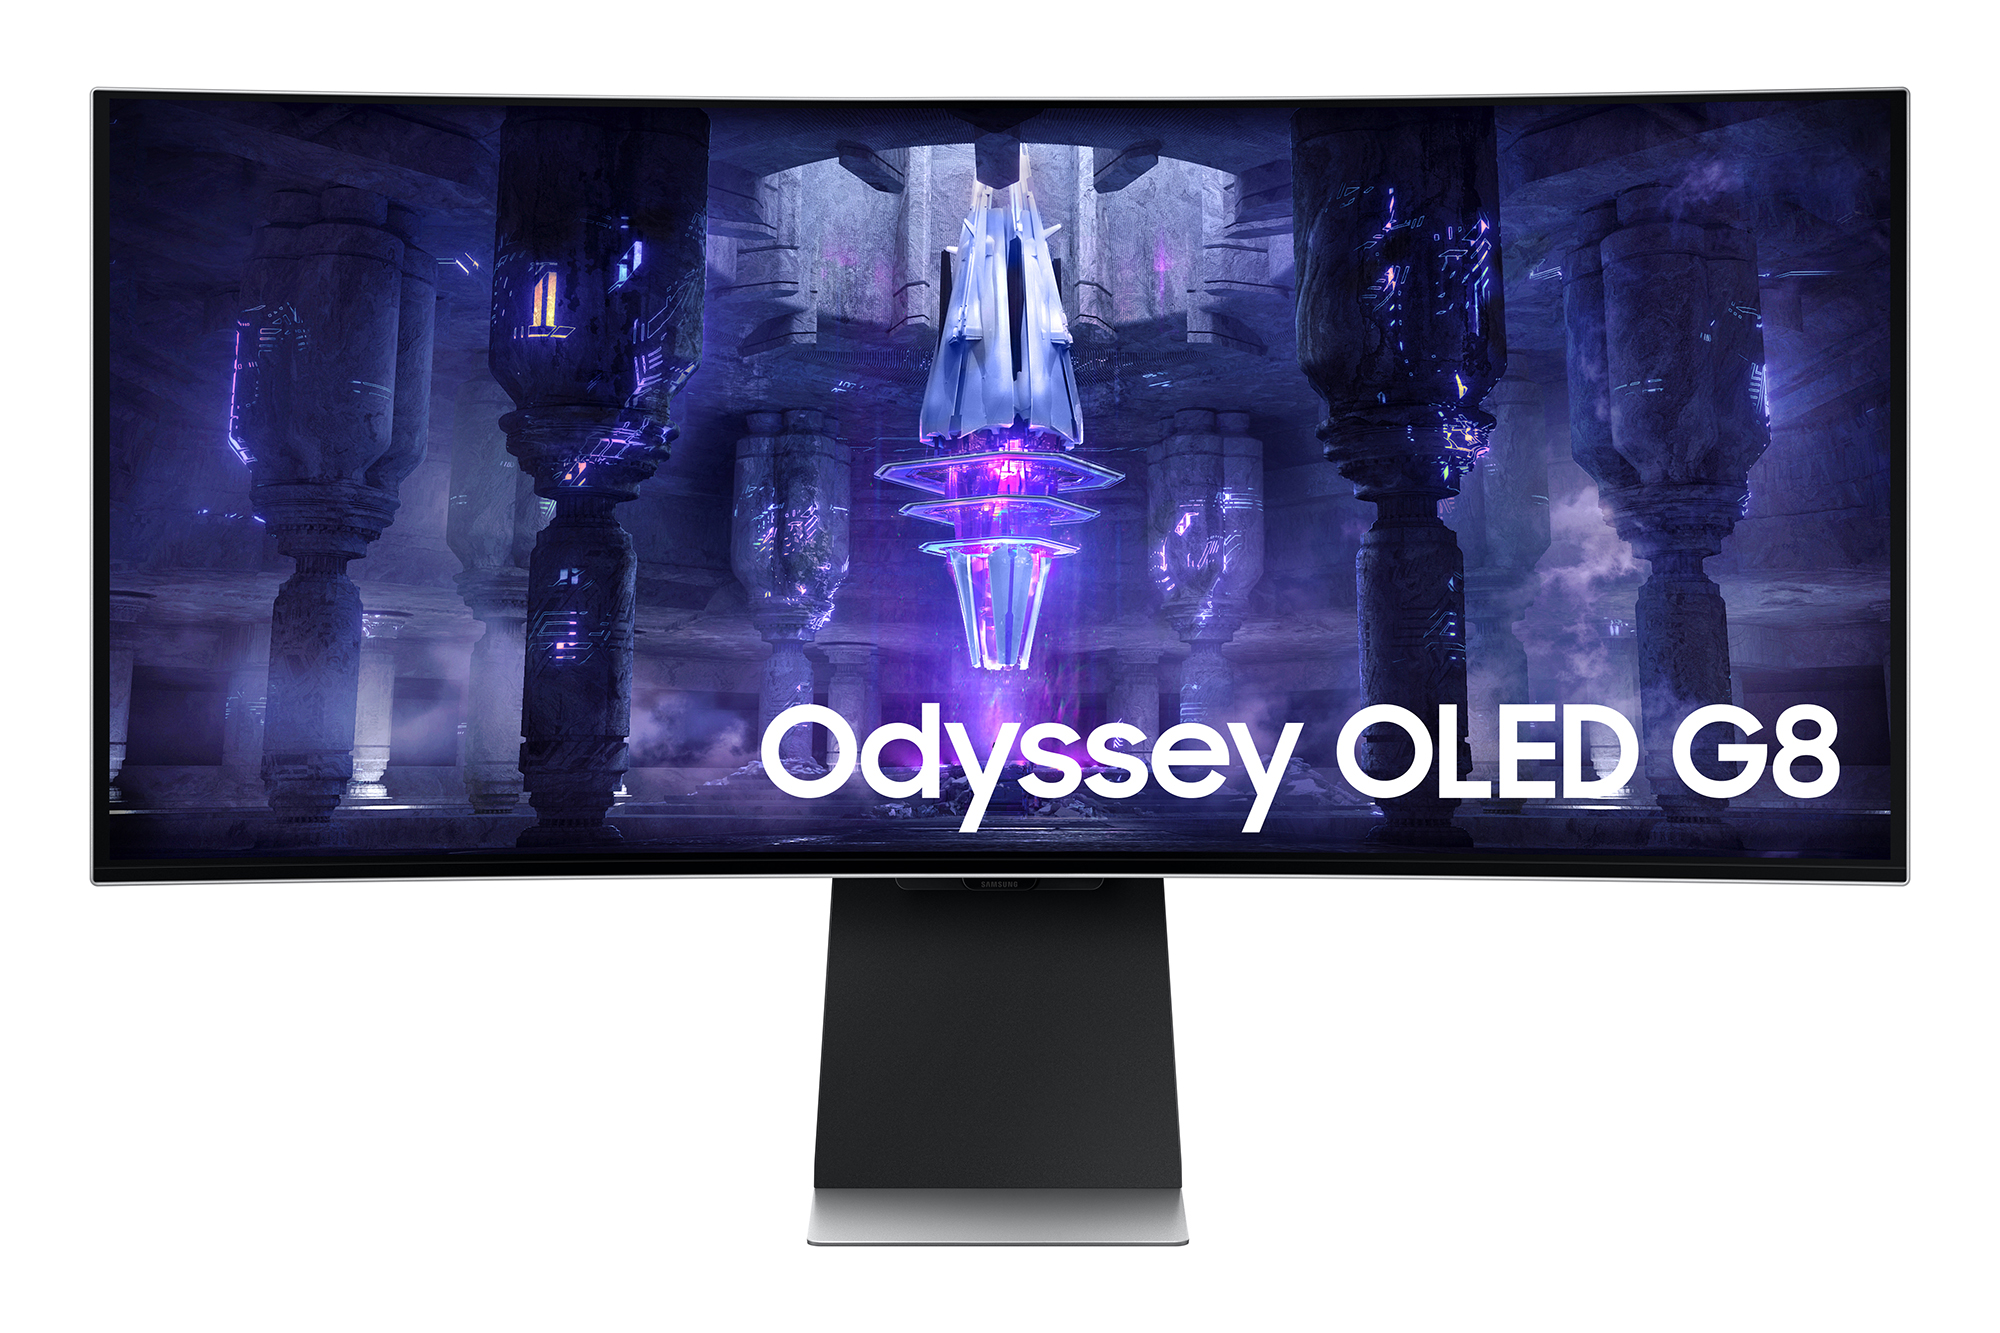 samsung-odyssey-oled-g8-34-inch-curved-gaming-monitor-presented-with-175-hz-refresh-rate-and-samsung-gaming-hub